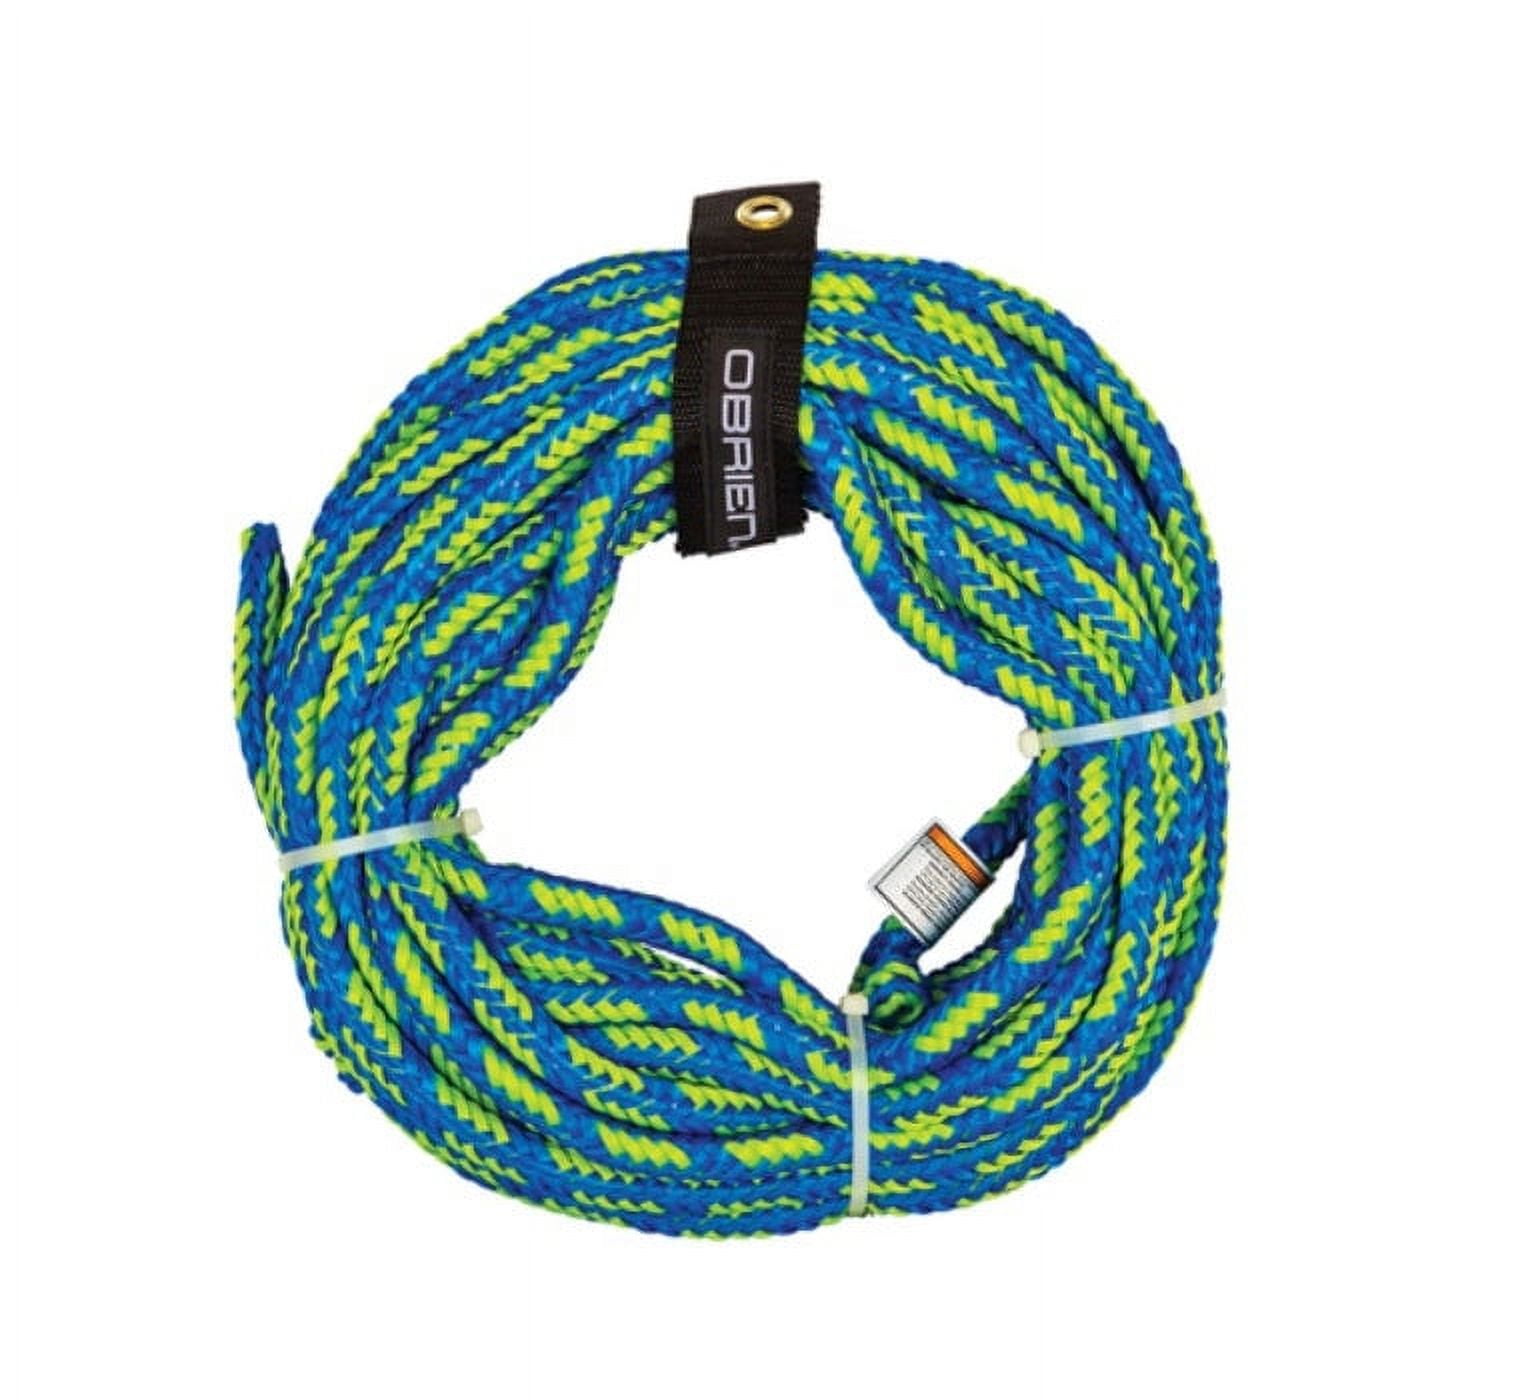 O'Brien 2-Person Floating Tube Rope, Yellow